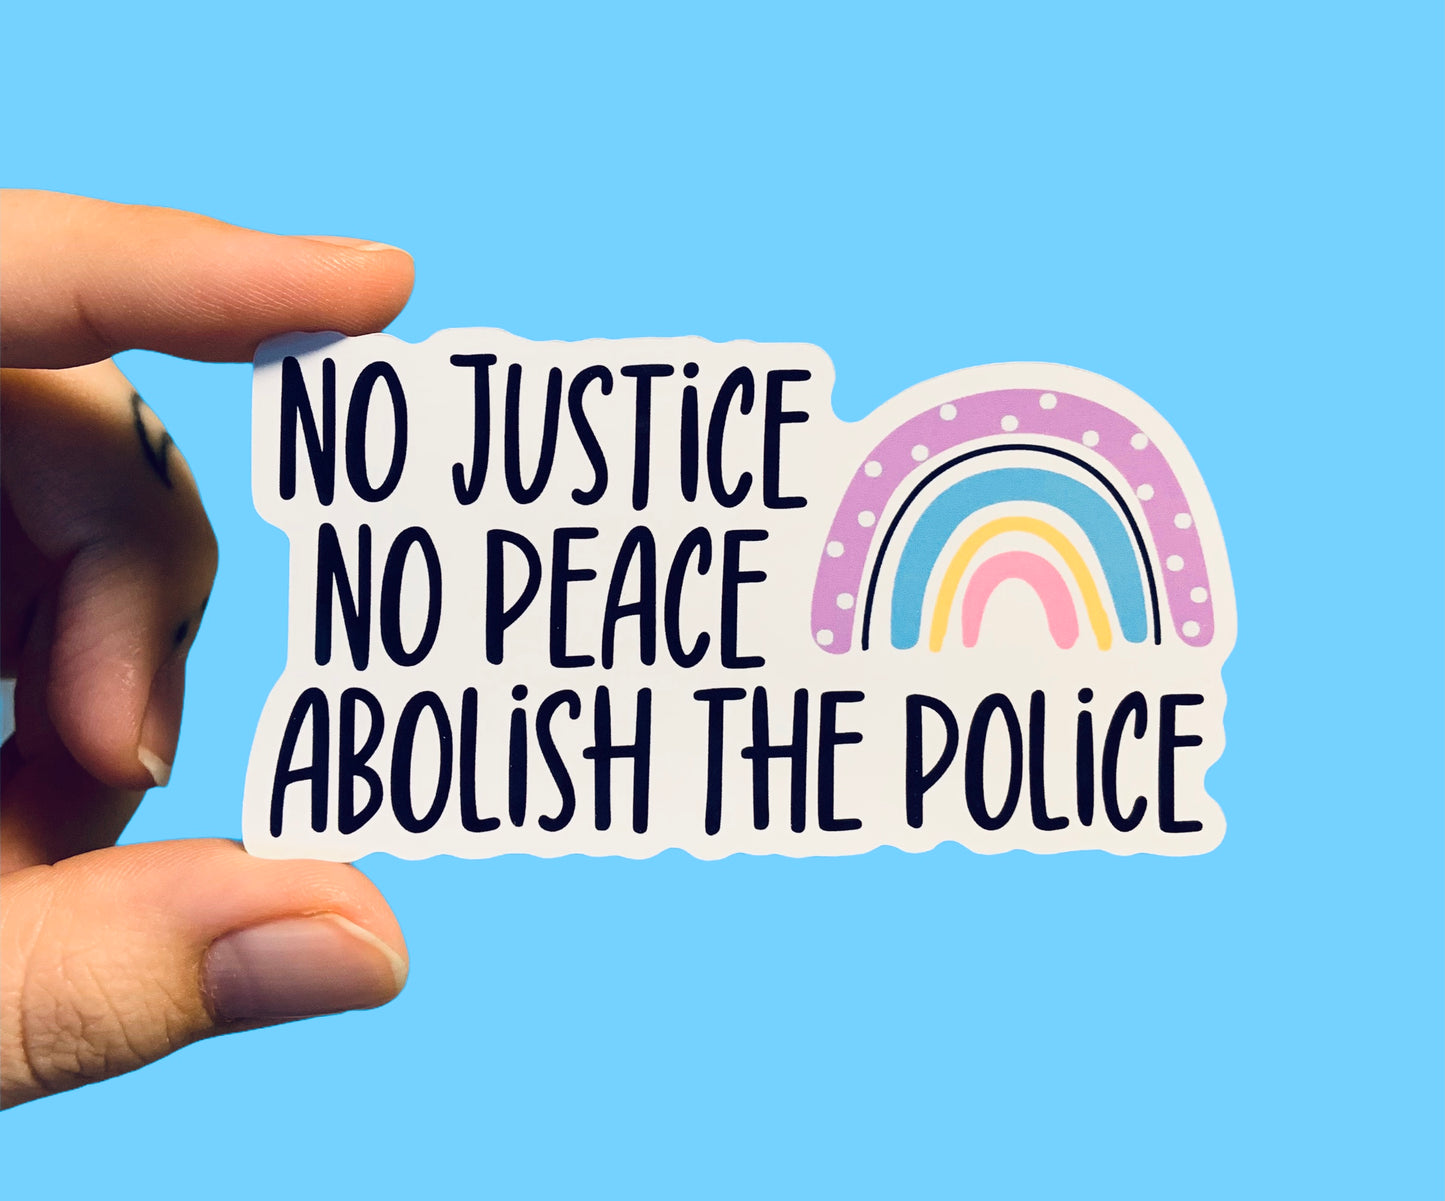 No justice no peace abolish the police (pack of 3 or 5 stickers)